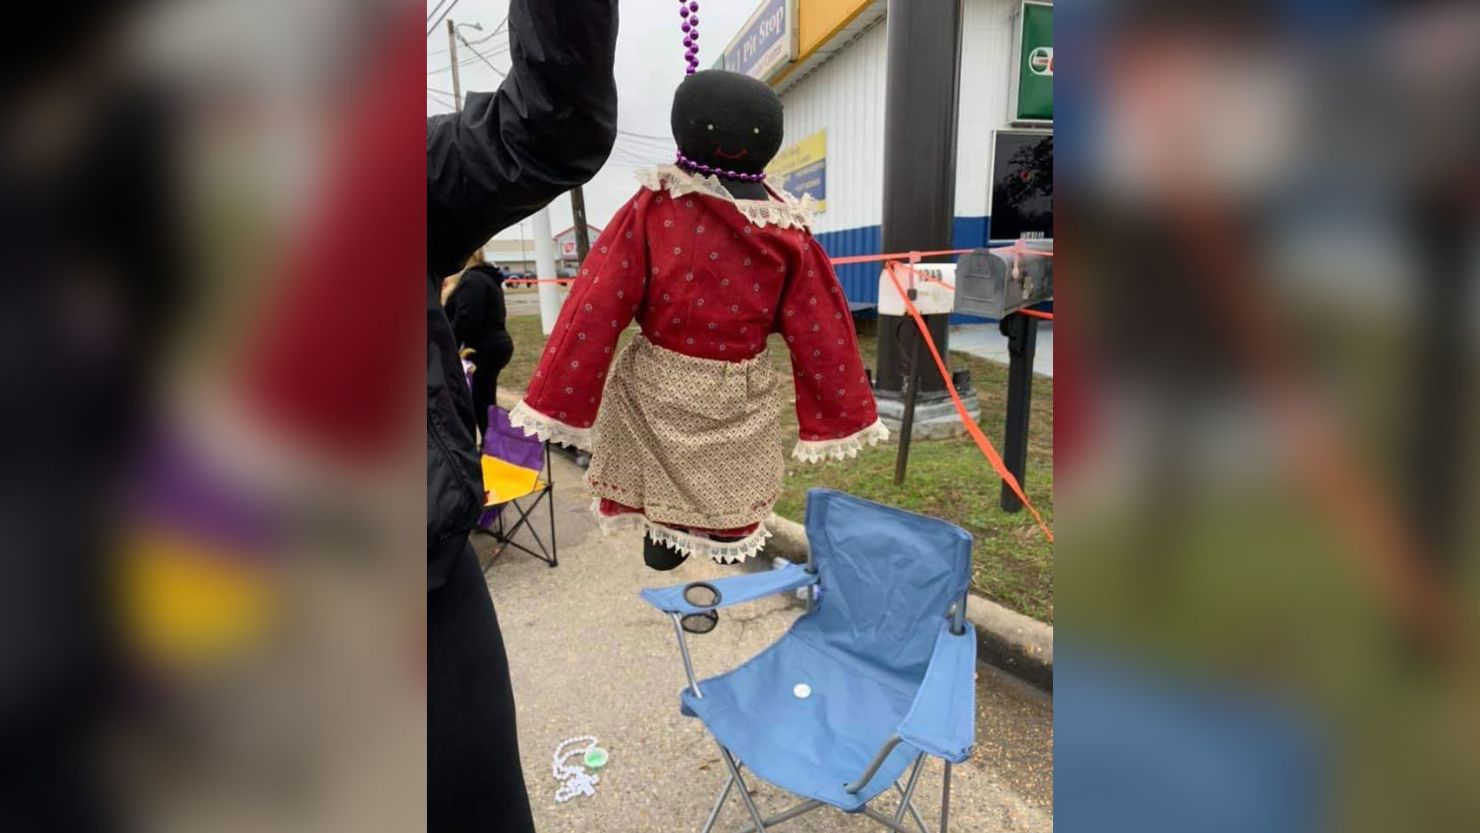 Nicole Fairconeture said that her 12-year-old daughter was given a black doll with beads forming a noose around its neck at a Mardi Gras parade in Mississippi.